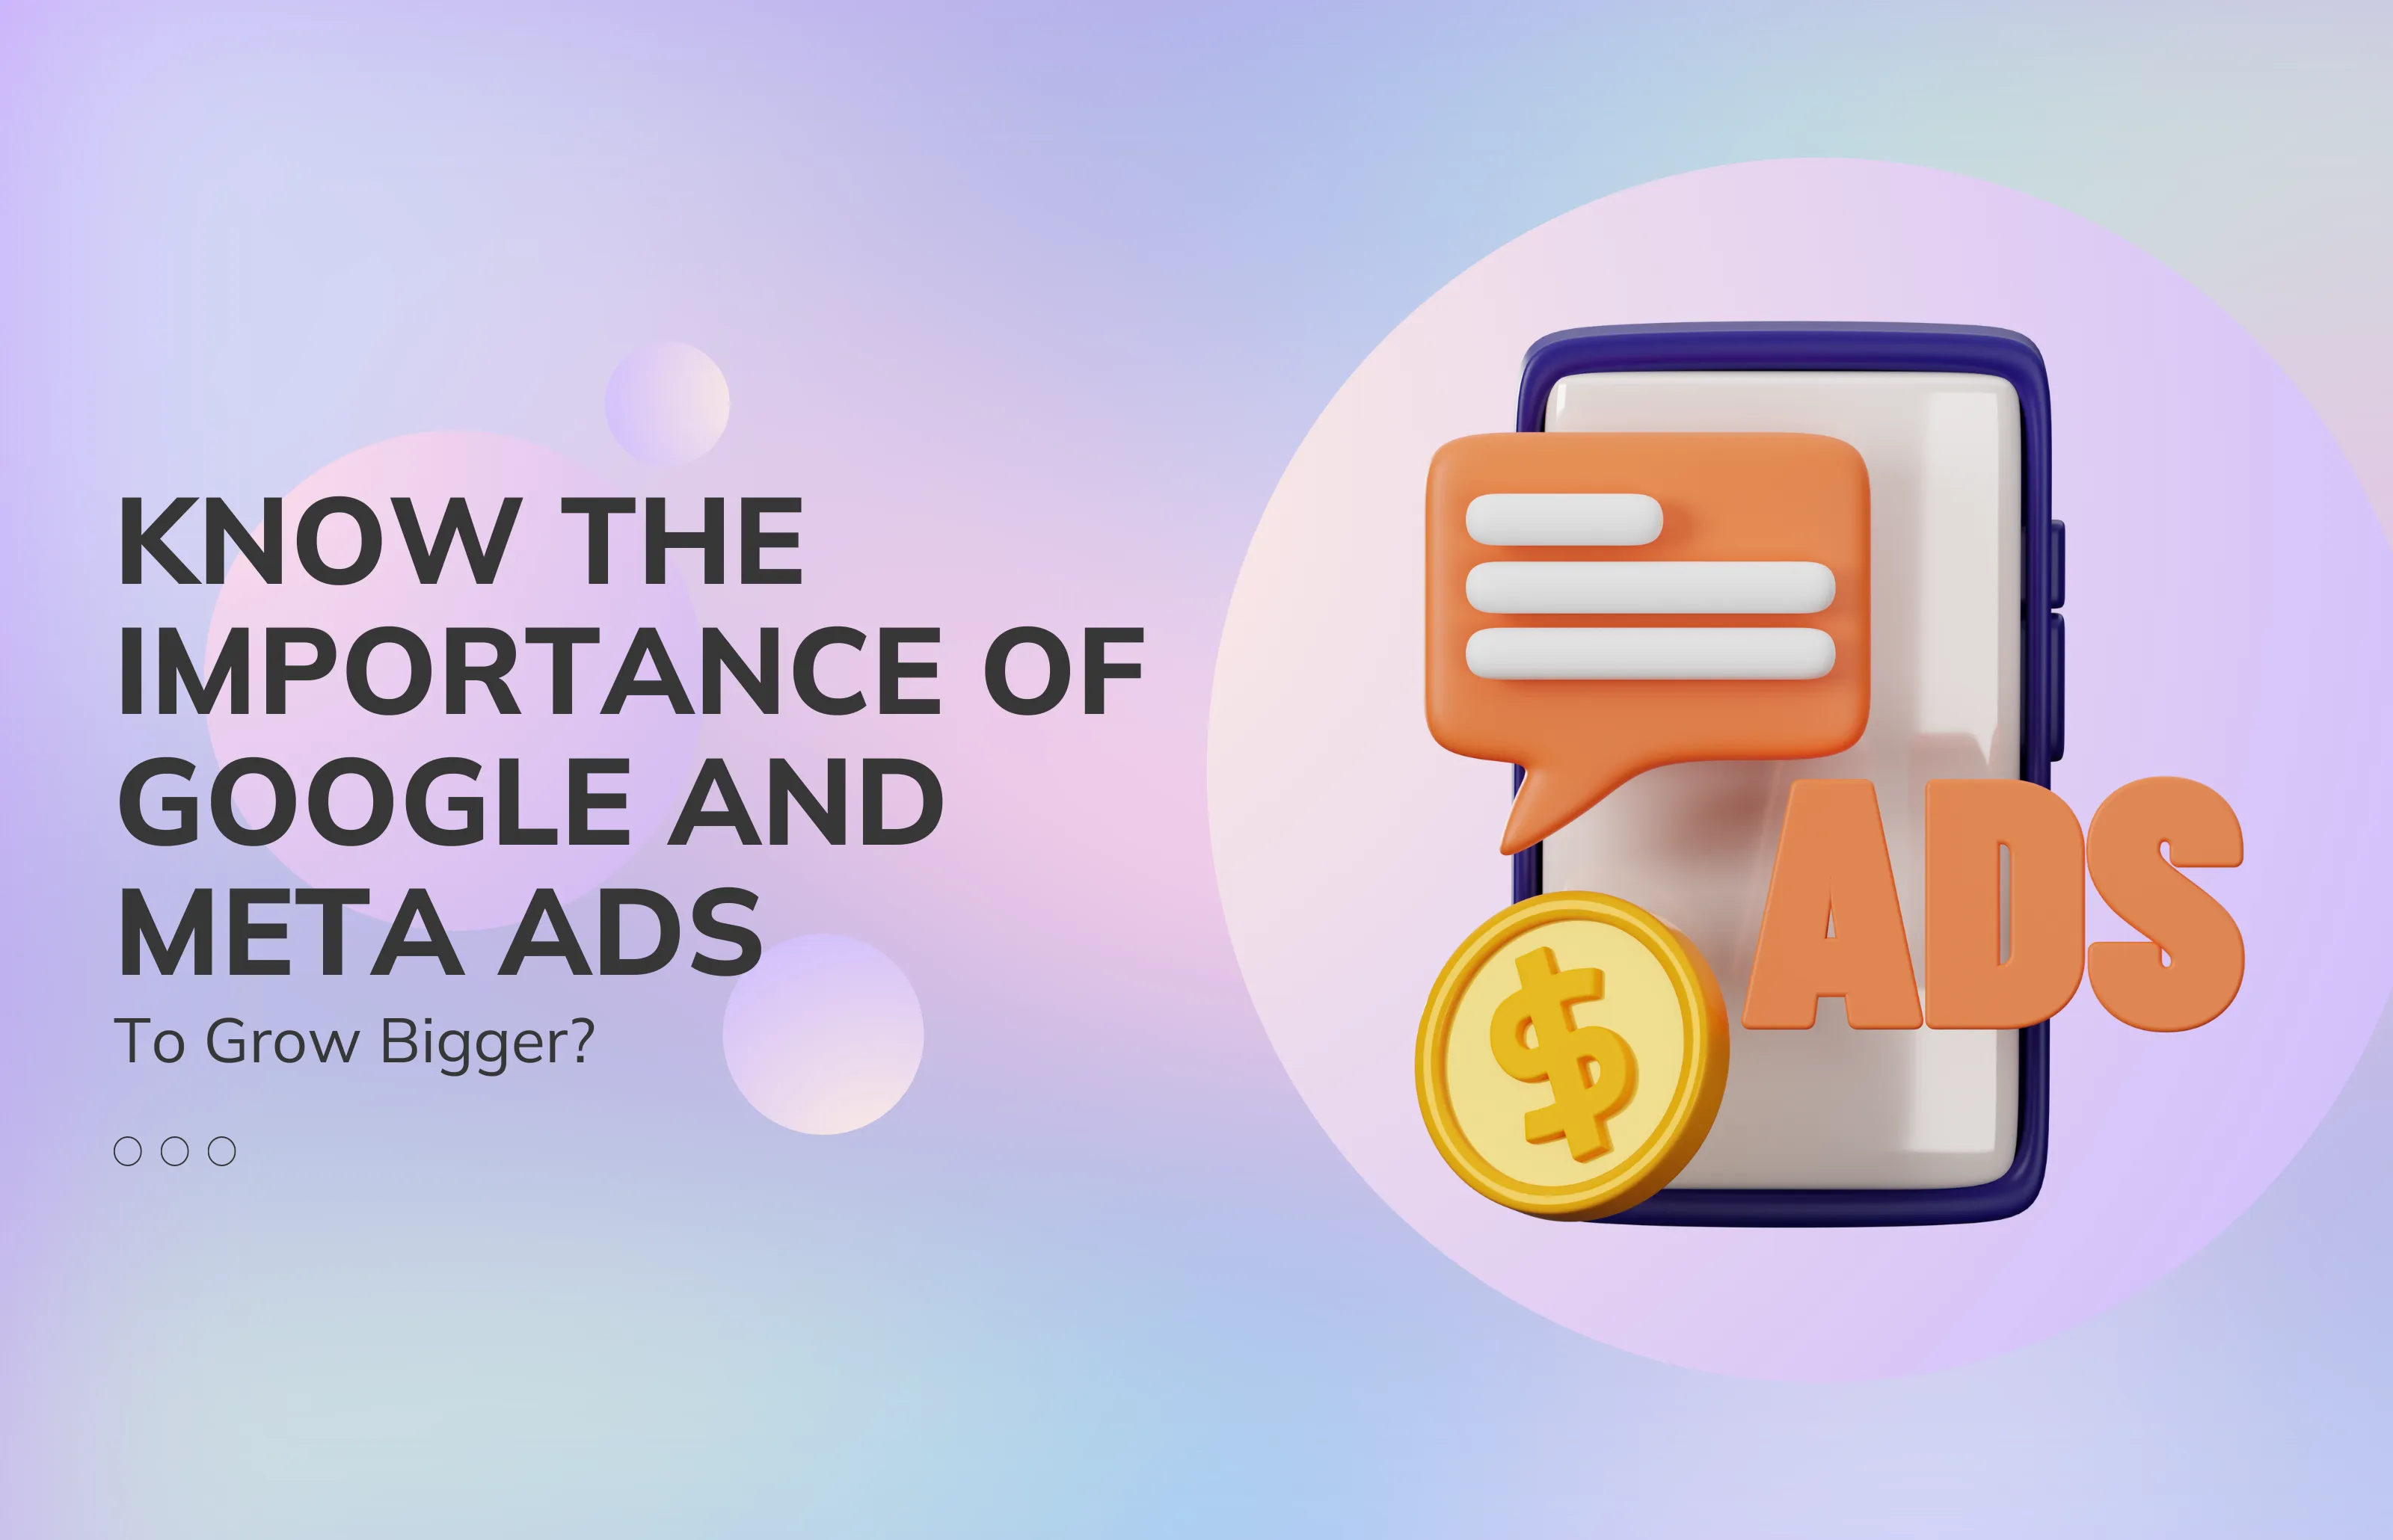 Know the Importance of Meta Ads and Google Ads to Grow Bigger